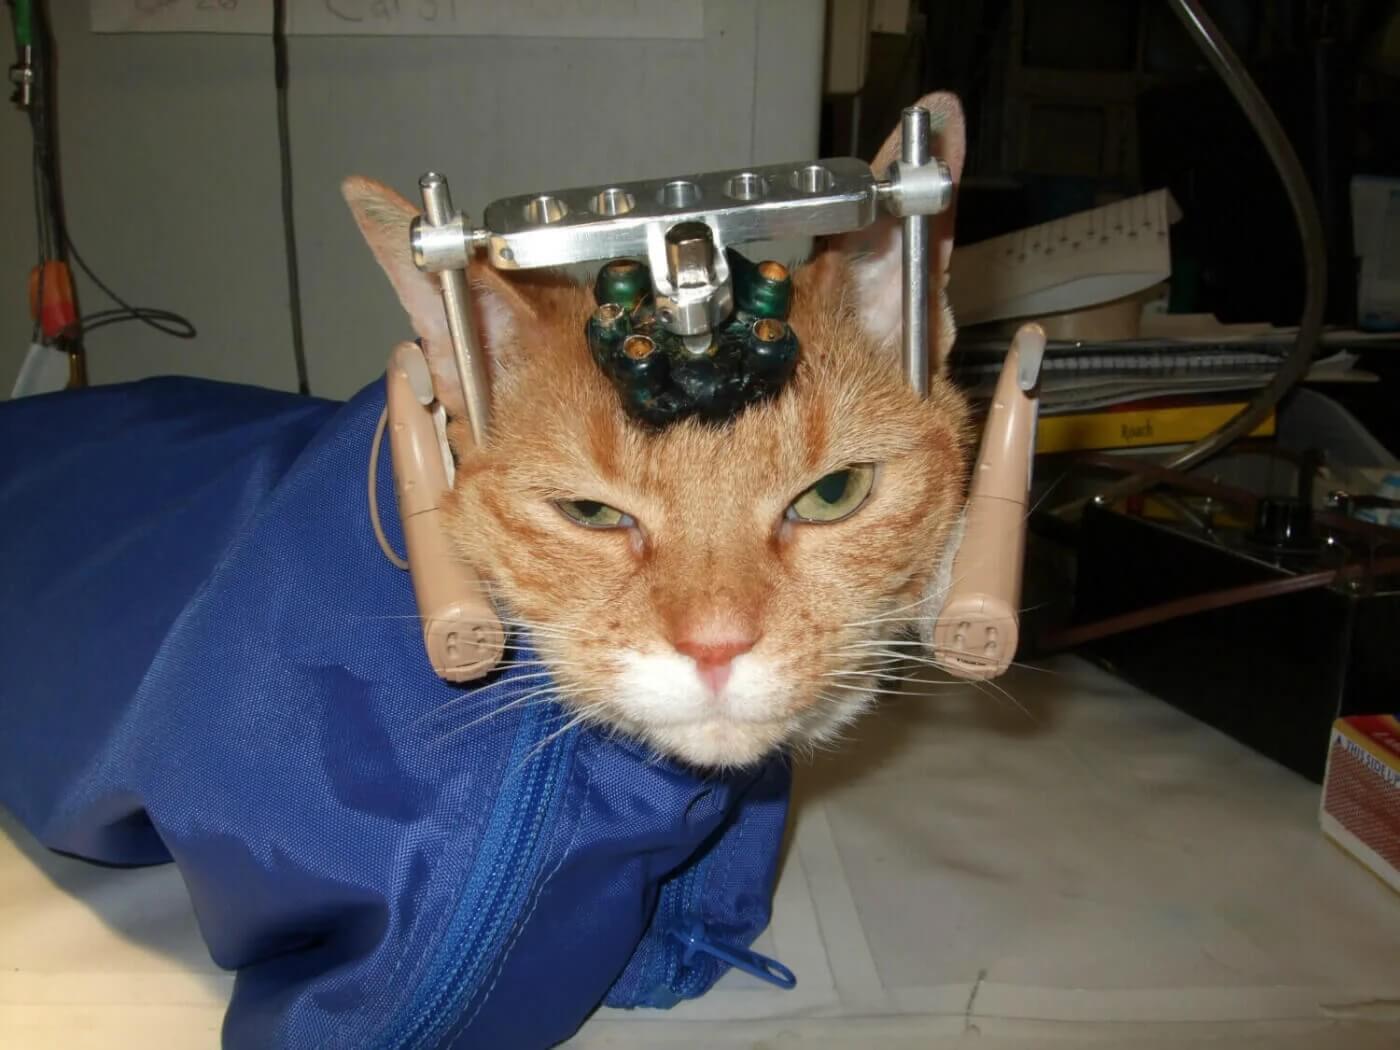 Let's End All Experiments on Animals! PETA Action